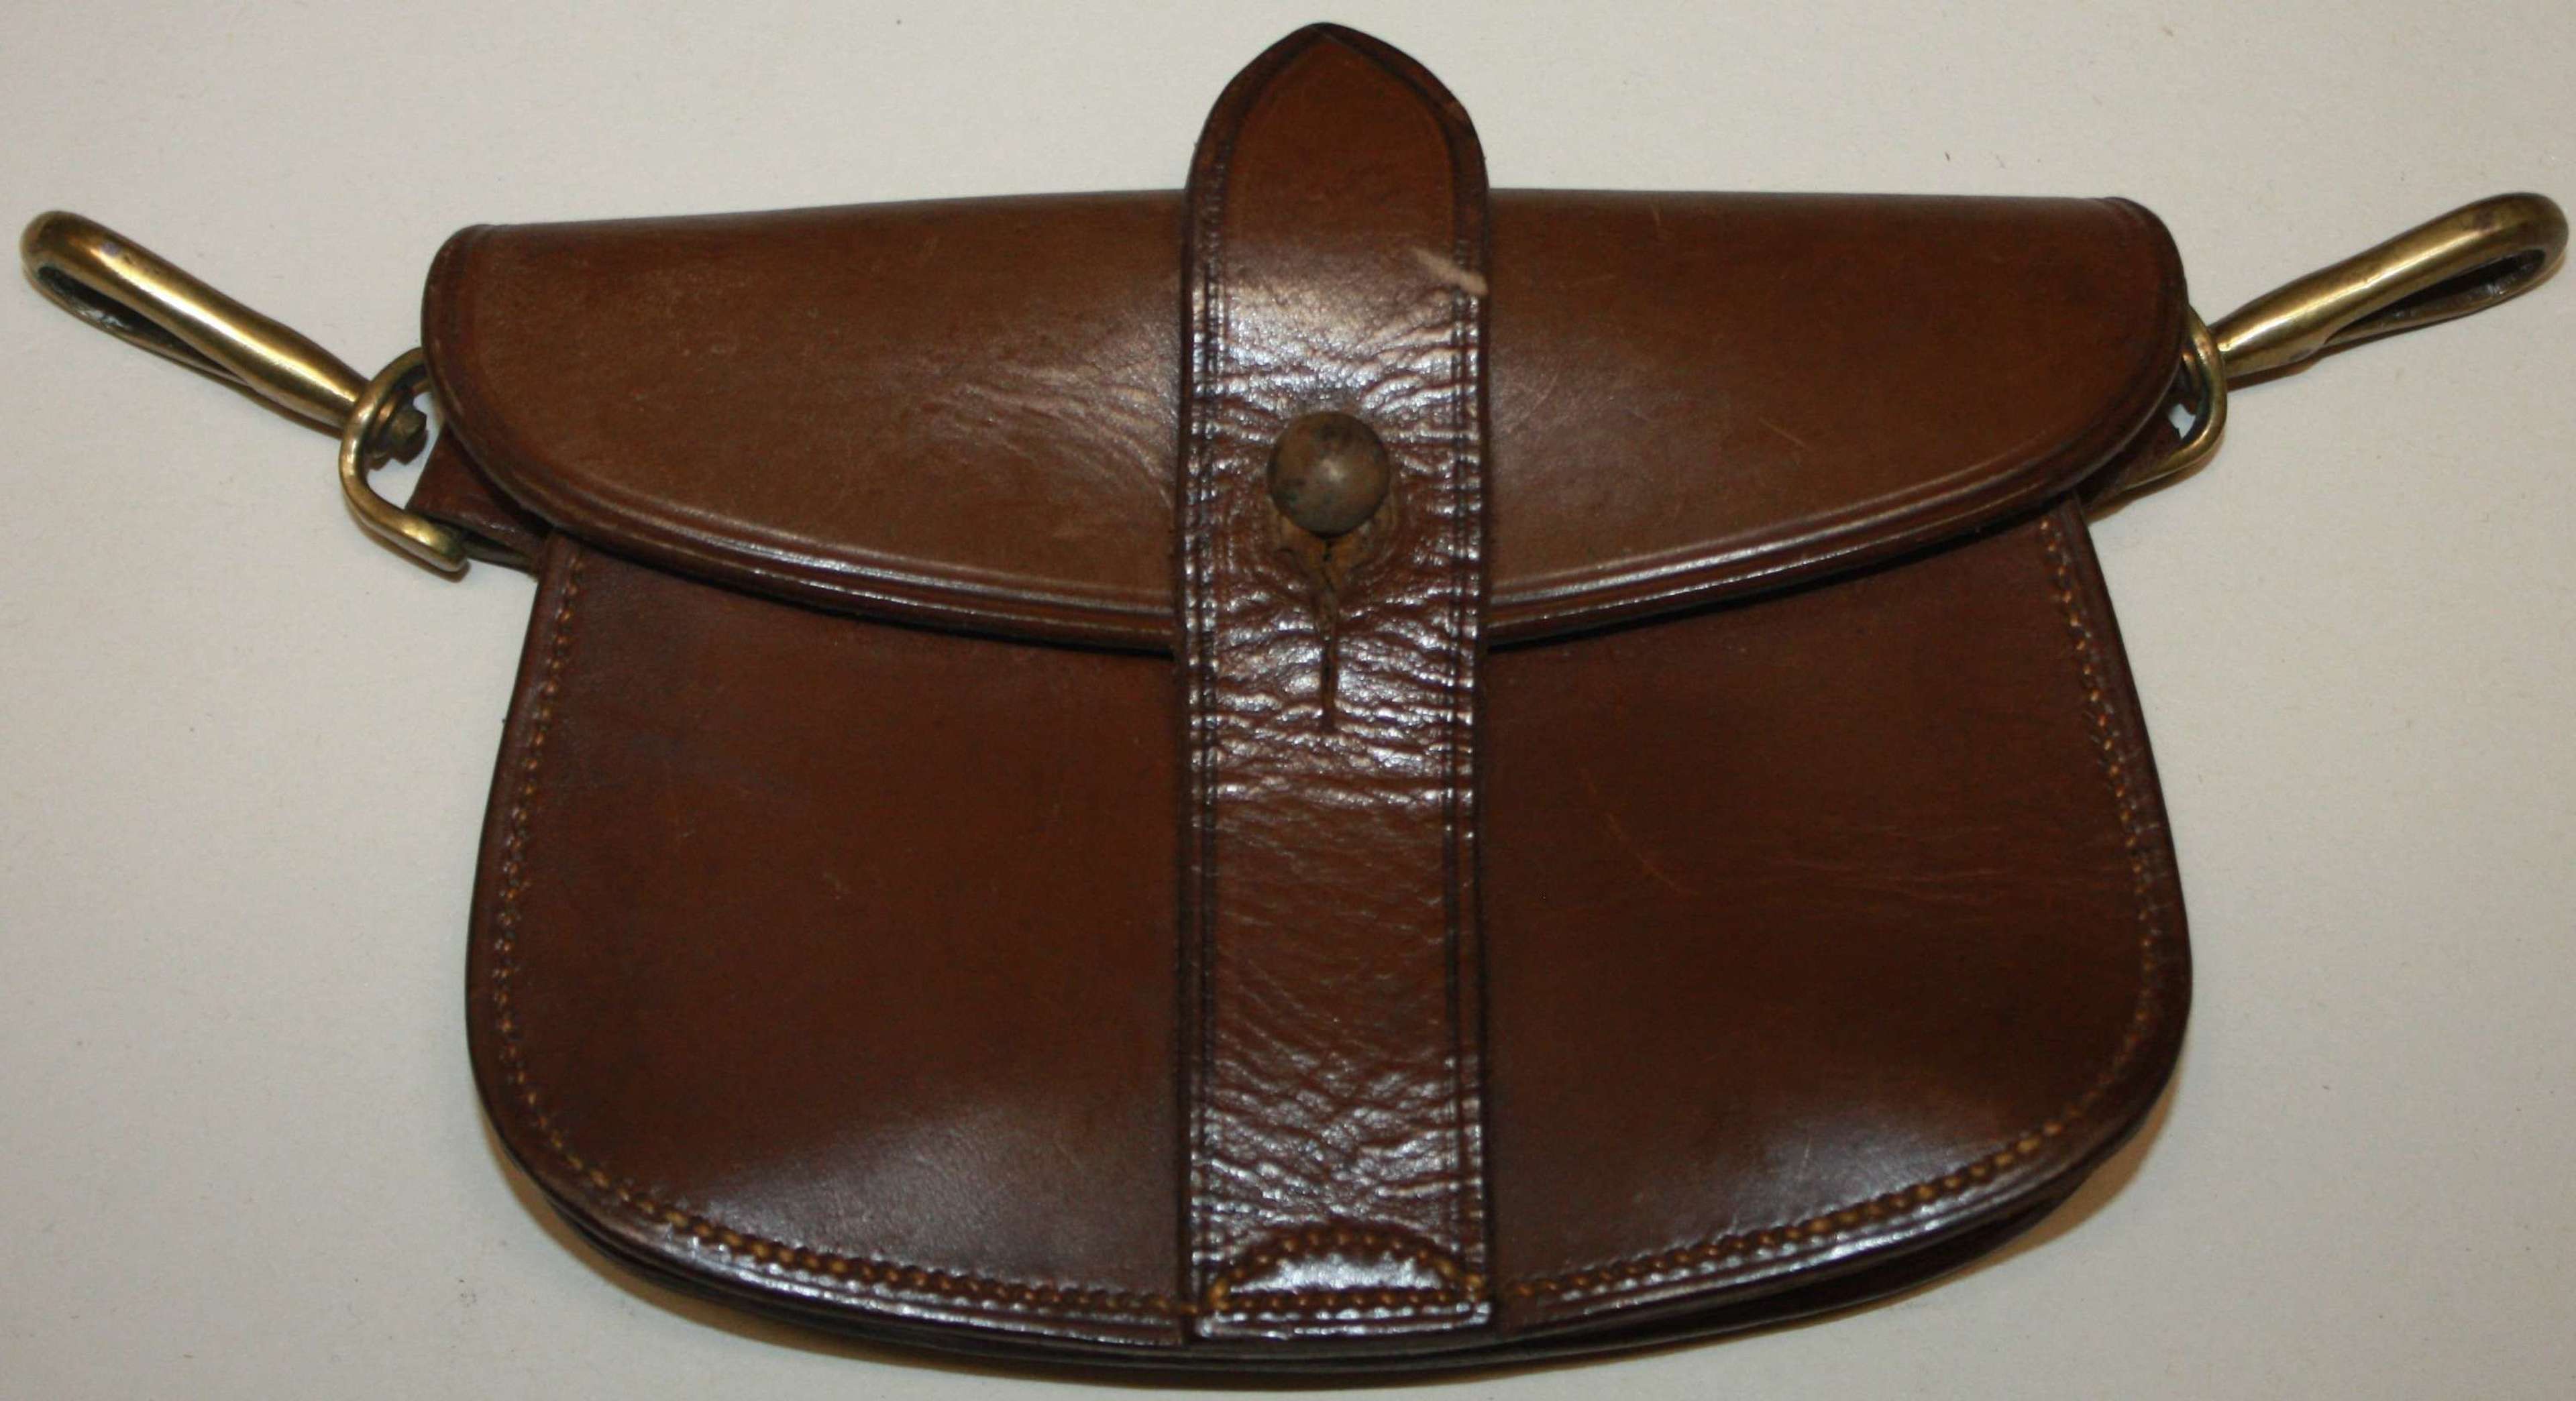 A RARE 1913 DATED OFFICERS MOUNTED TROOPS SAM BROWN PISTOL AMMO POUCH